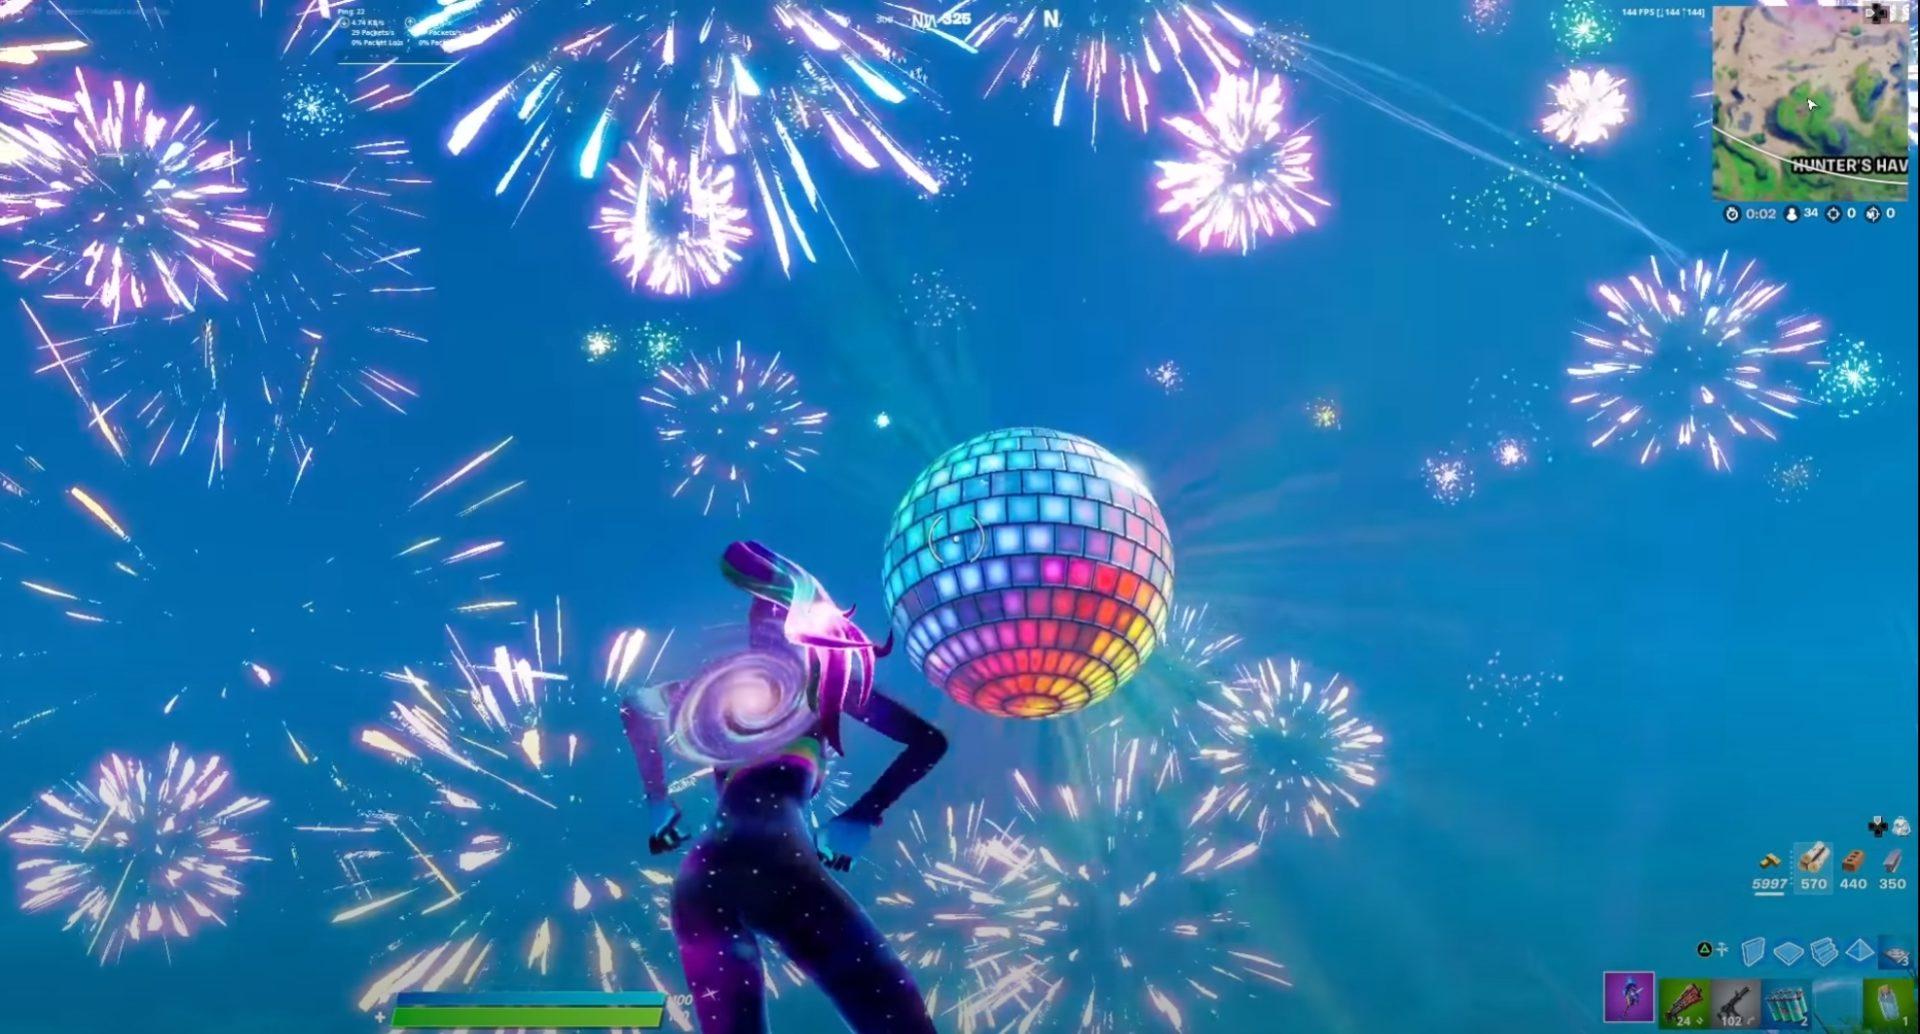 Fortnite's 2021 event with fireworks in the sky and a giant disco ball